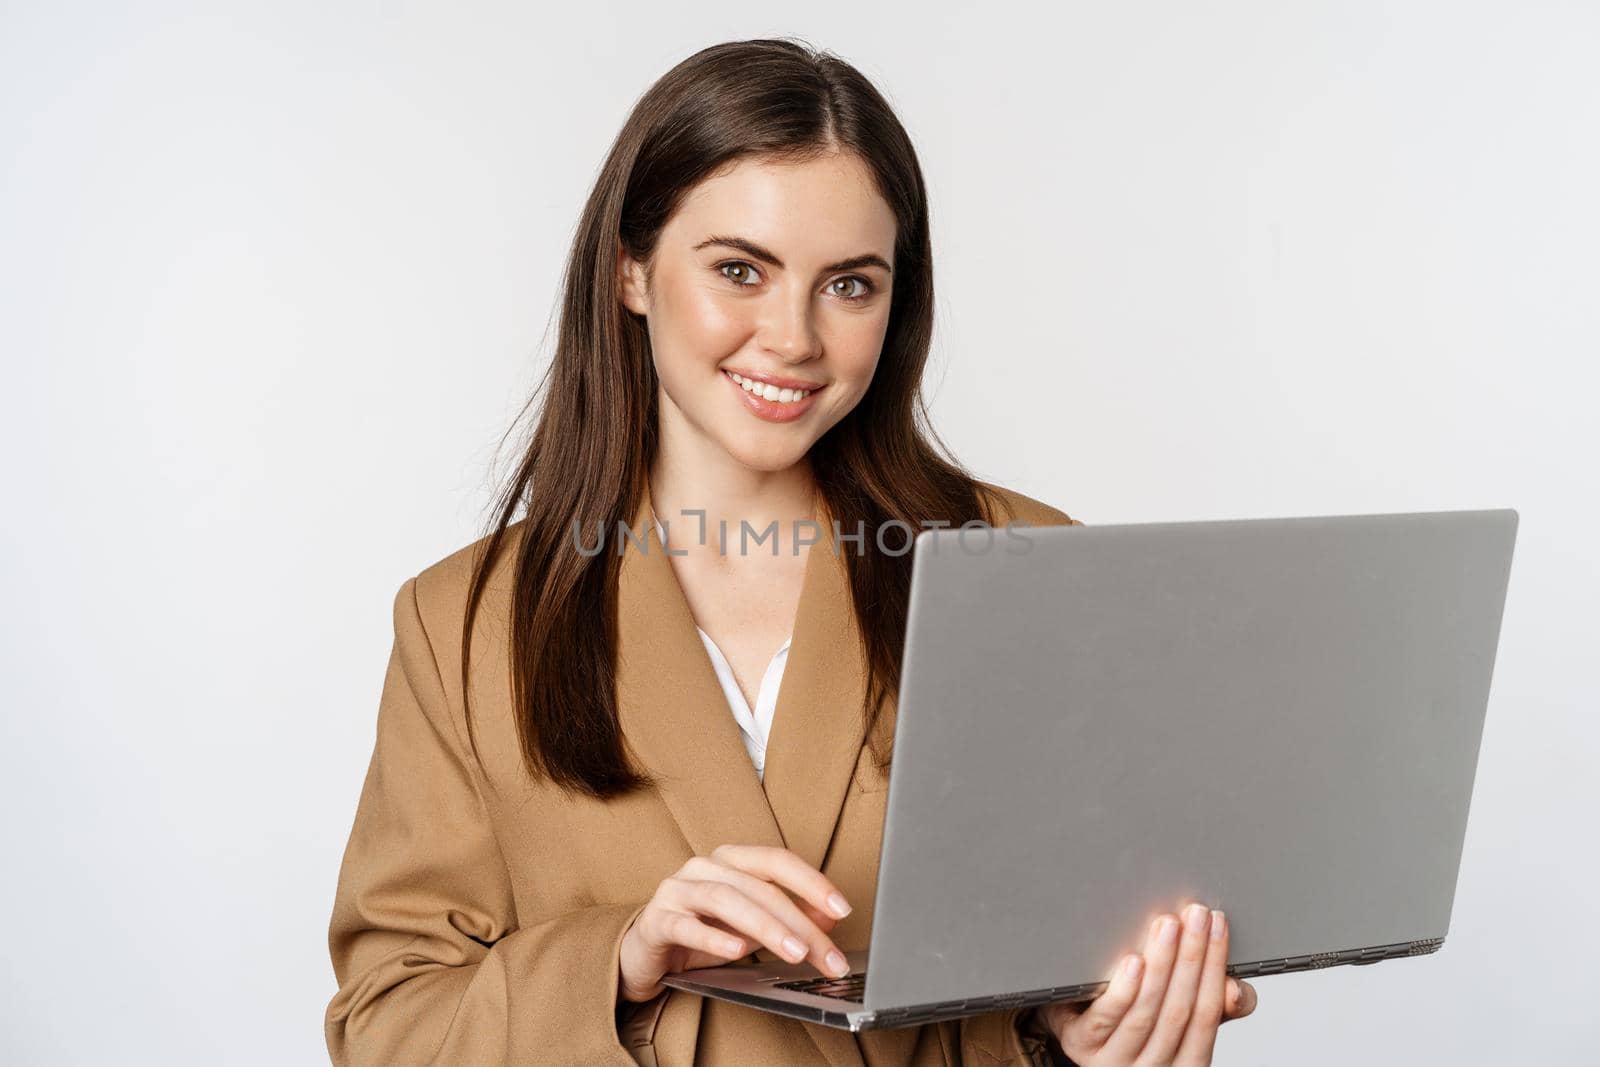 Portrait of corporate woman working with laptop, smiling and looking assertive, white background.